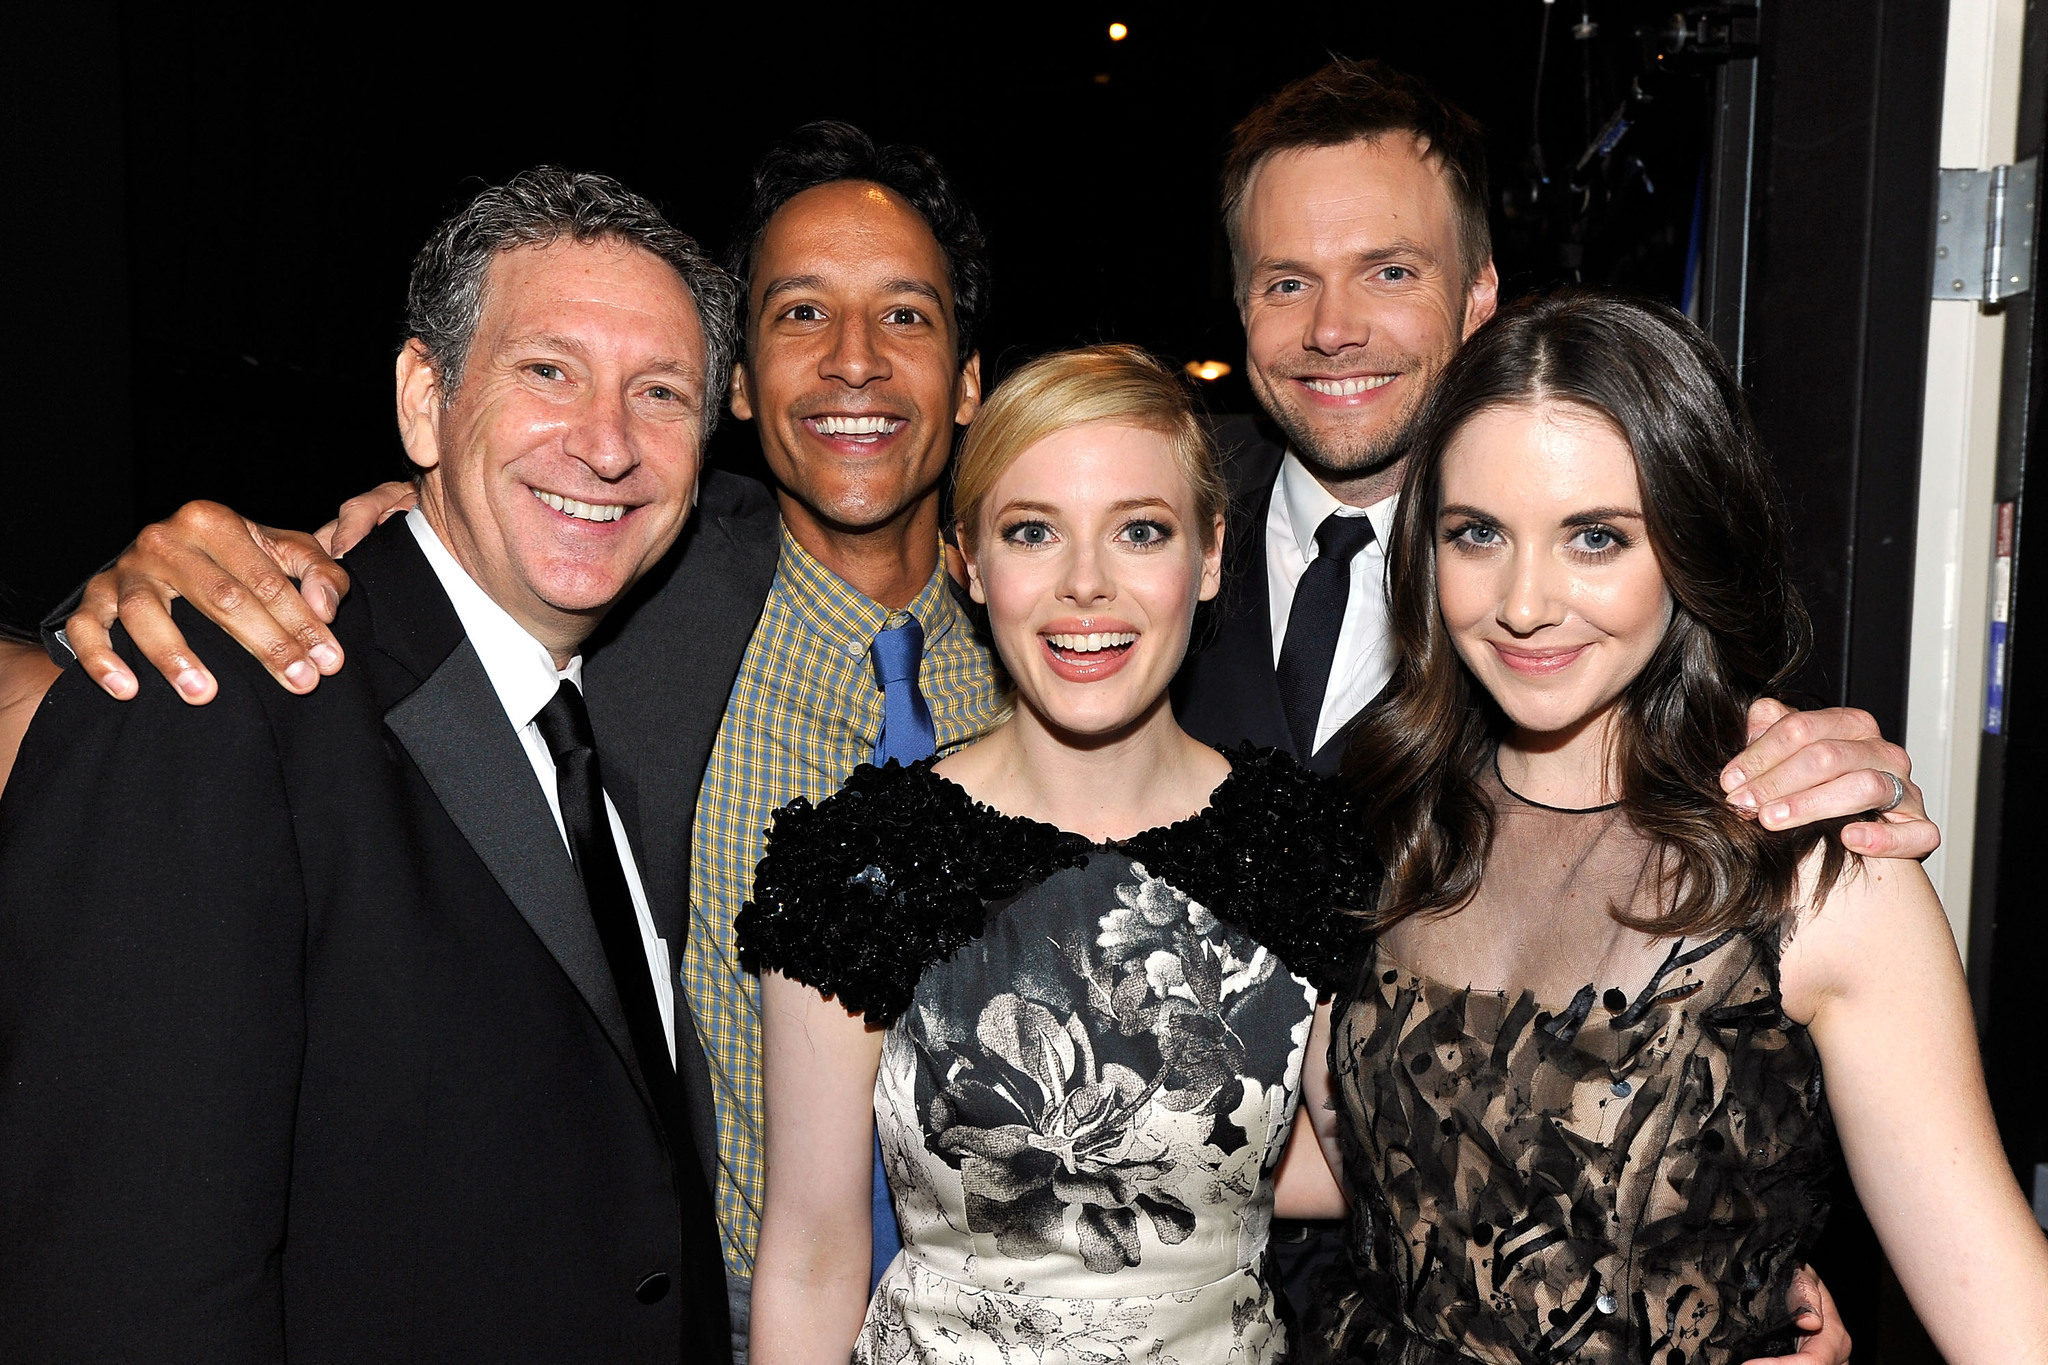 Russ Krasnoff, Joel McHale, Alison Brie, Gillian Jacobs and Danny Pudi at event of Community (2009)